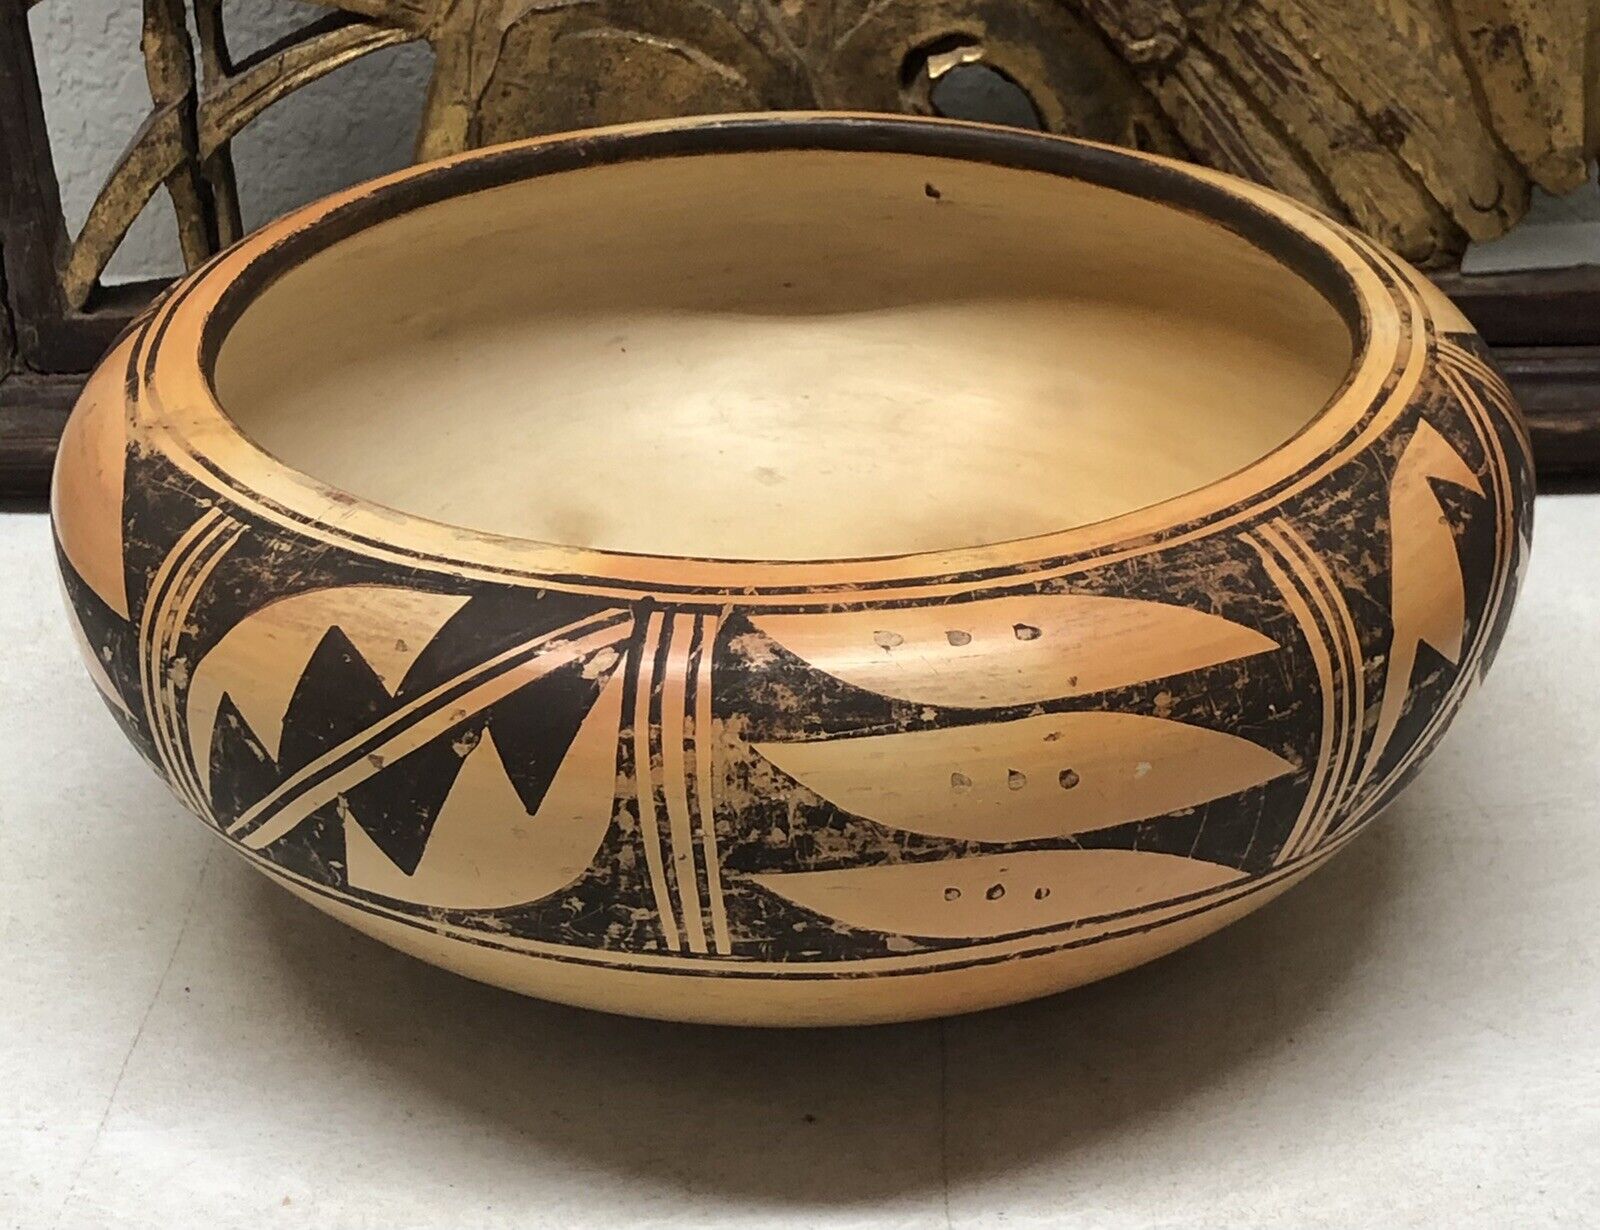 HOPI Native American INDIAN POTTERY BOWL Vintage - Maybe Antique???